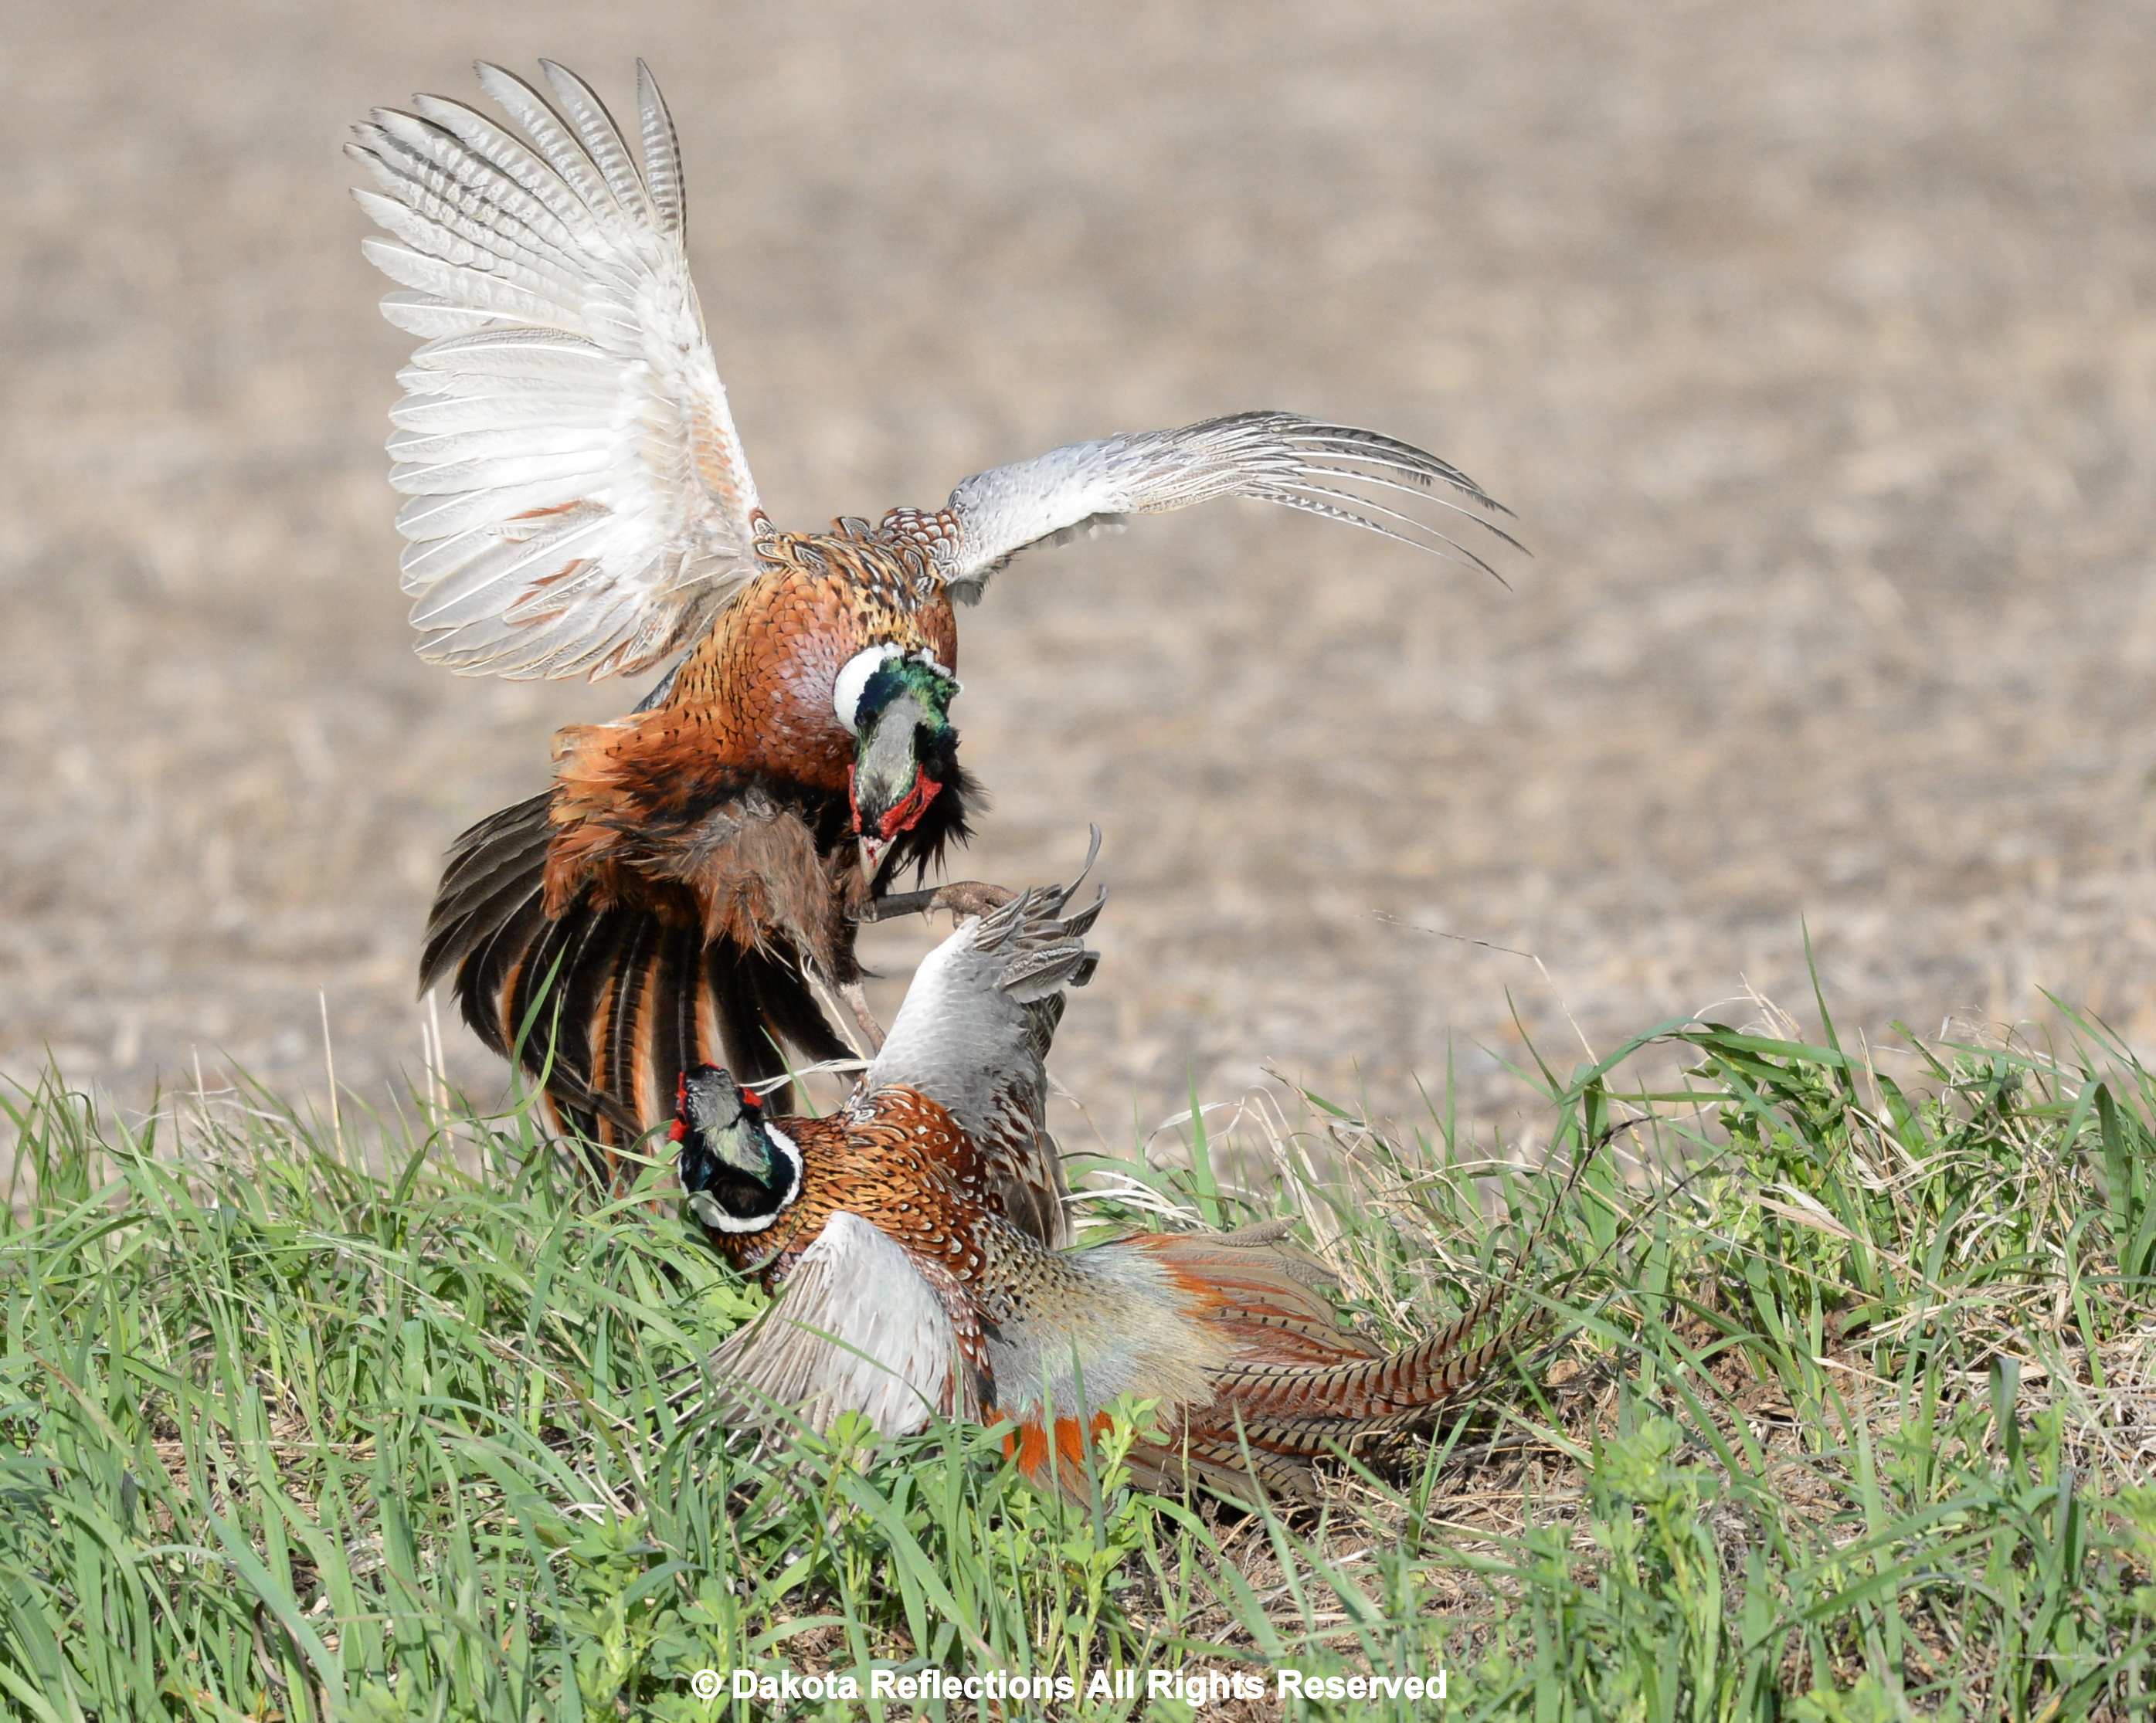 Ring-necked pheasants are wily escape artists